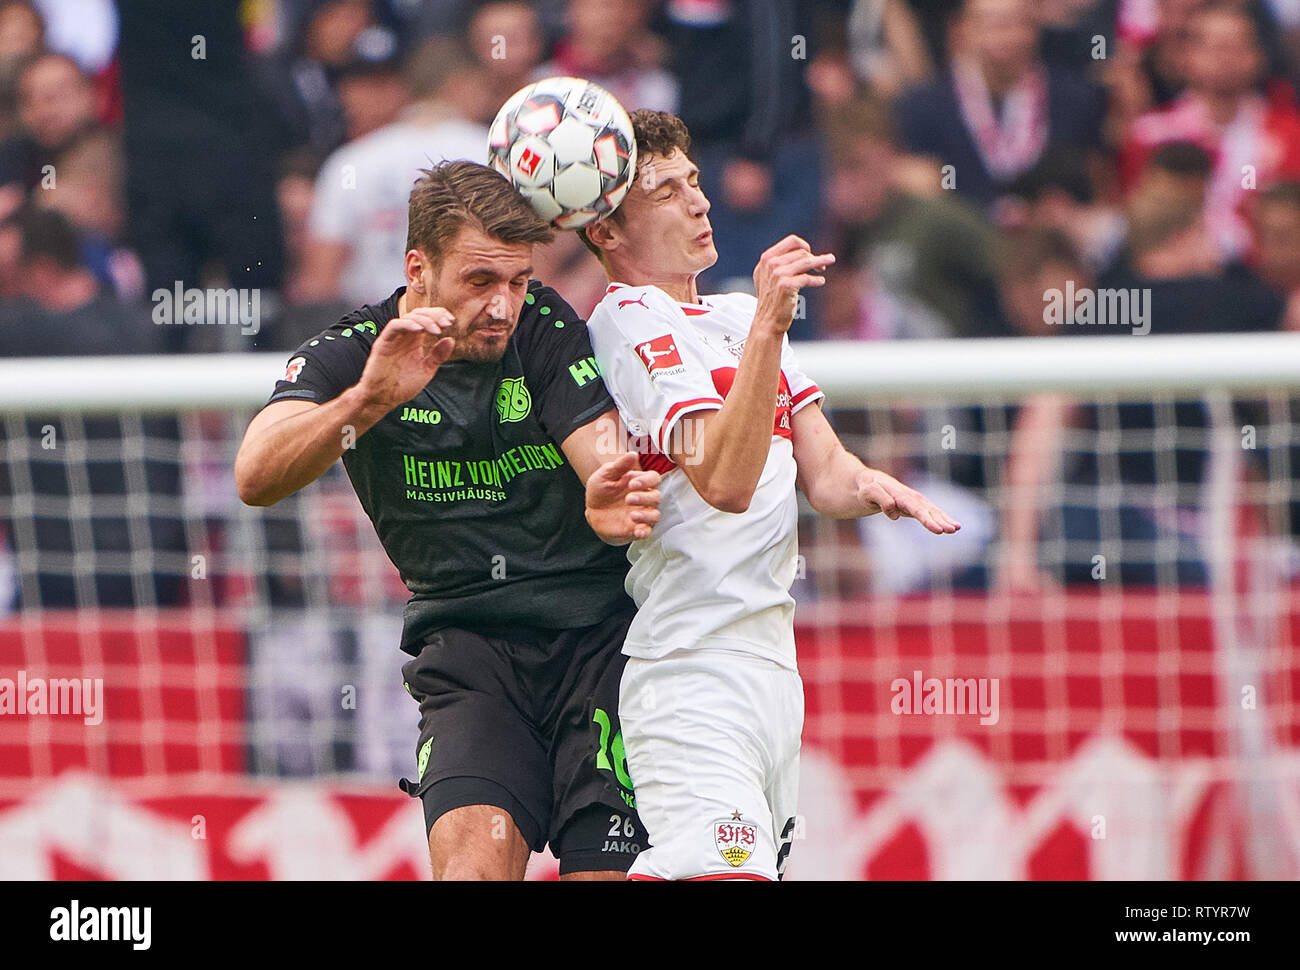 Stuttgart, Germany . 03rd Mar, 2019. Benjamin PAVARD, VFB 21  compete for the ball, tackling, duel, header, action, fight against Hendrik WEYDANDT, H96 26  VFB STUTTGART - HANNOVER 96  - DFL REGULATIONS PROHIBIT ANY USE OF PHOTOGRAPHS as IMAGE SEQUENCES and/or QUASI-VIDEO -  DFL 1.German Soccer League , Stuttgart, March 3, 2019,  Season 2018/2019, matchday 24, H96 Credit: Peter Schatz/Alamy Live News Stock Photo